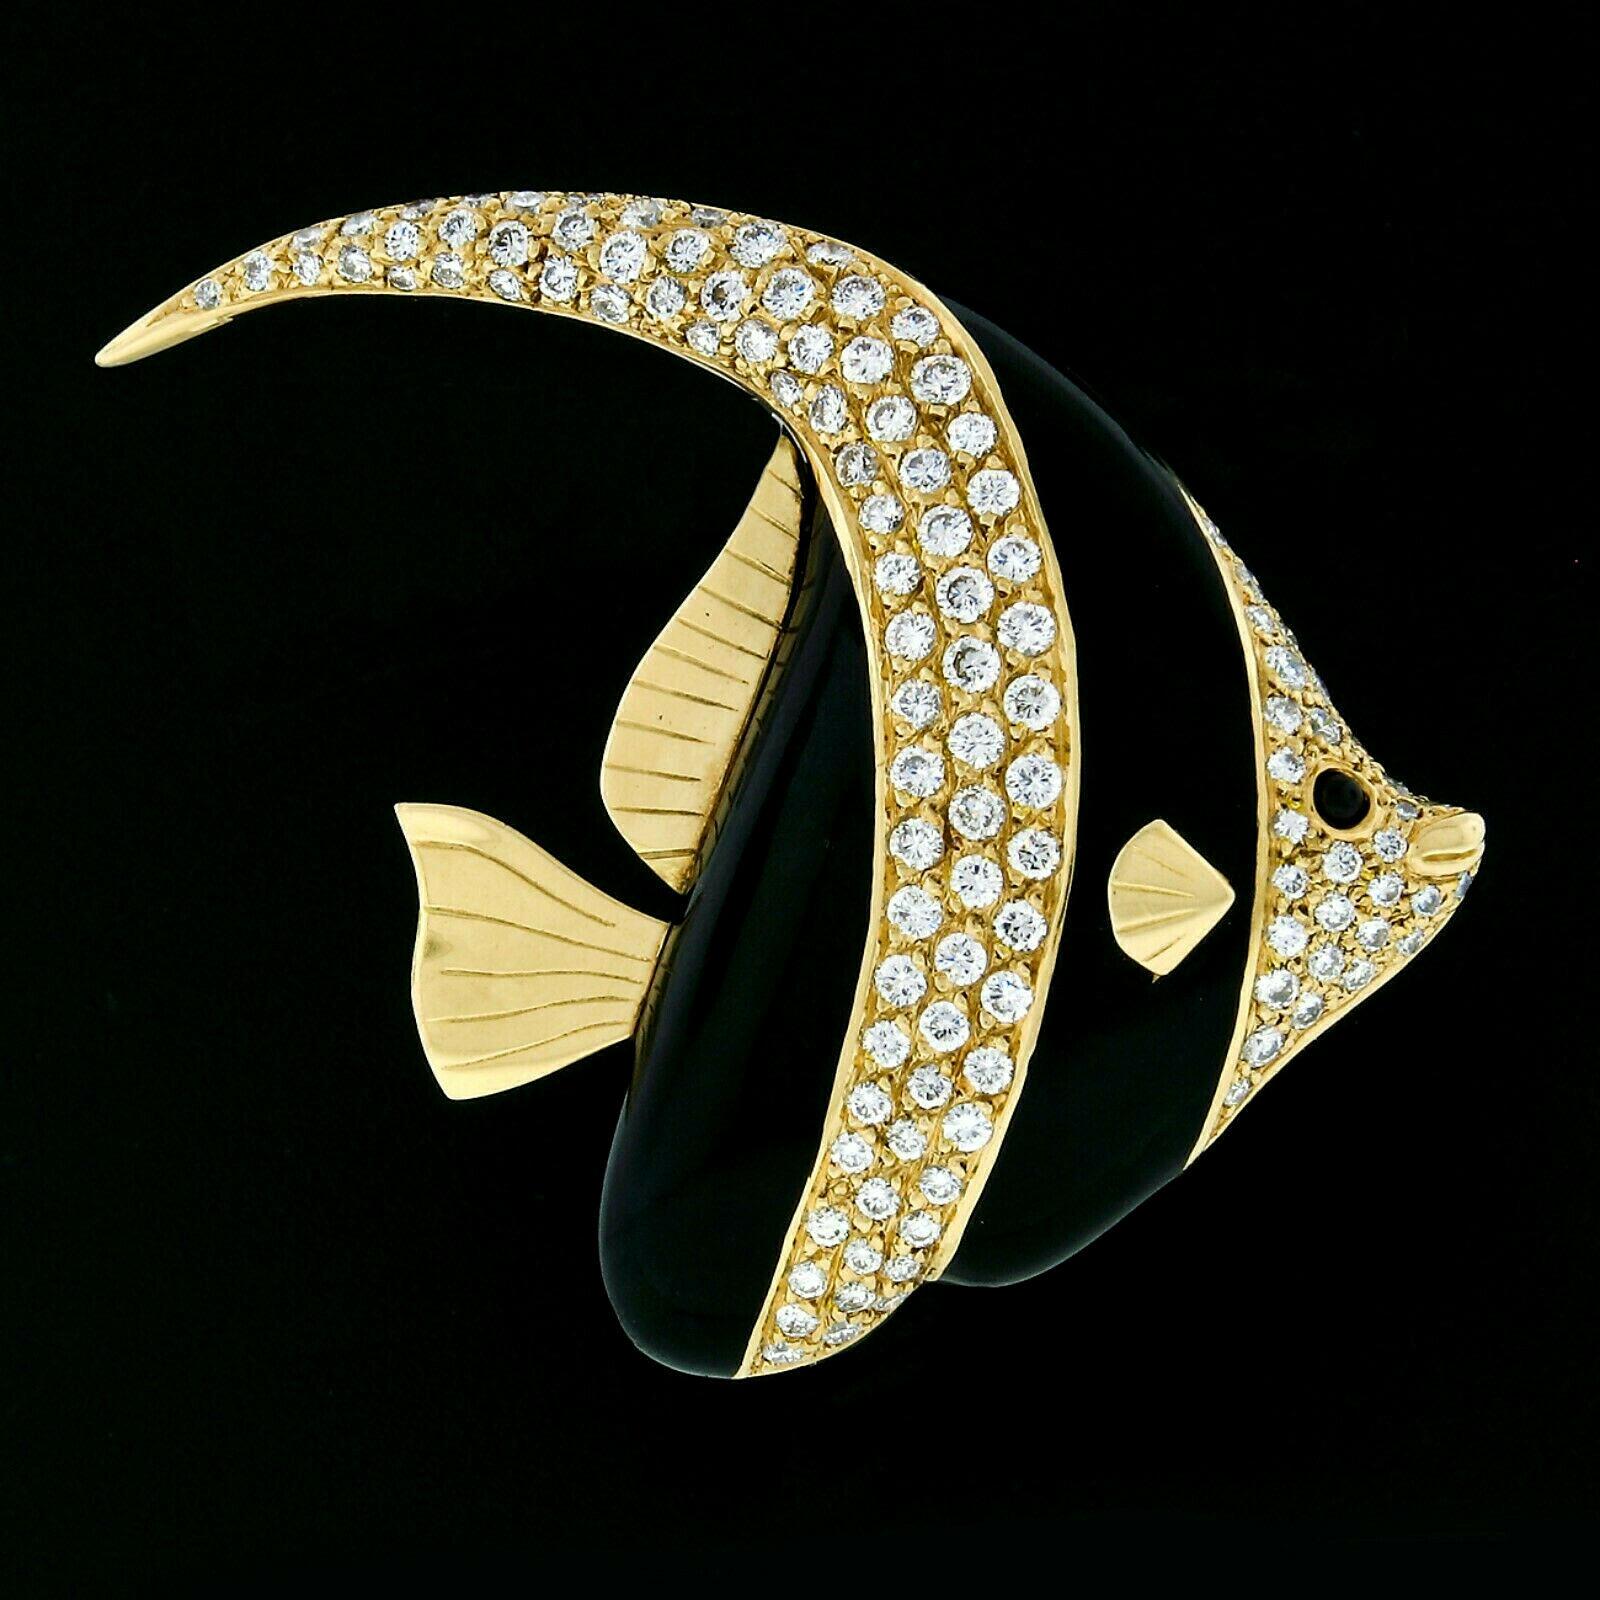 This statement vintage pin brooch was designed and crafted in England from solid 18k yellow gold. It features an absolutely heart warming and unique Moorish Idol fish design. Just like the real fish, this brooch stands out in contrasting bands of